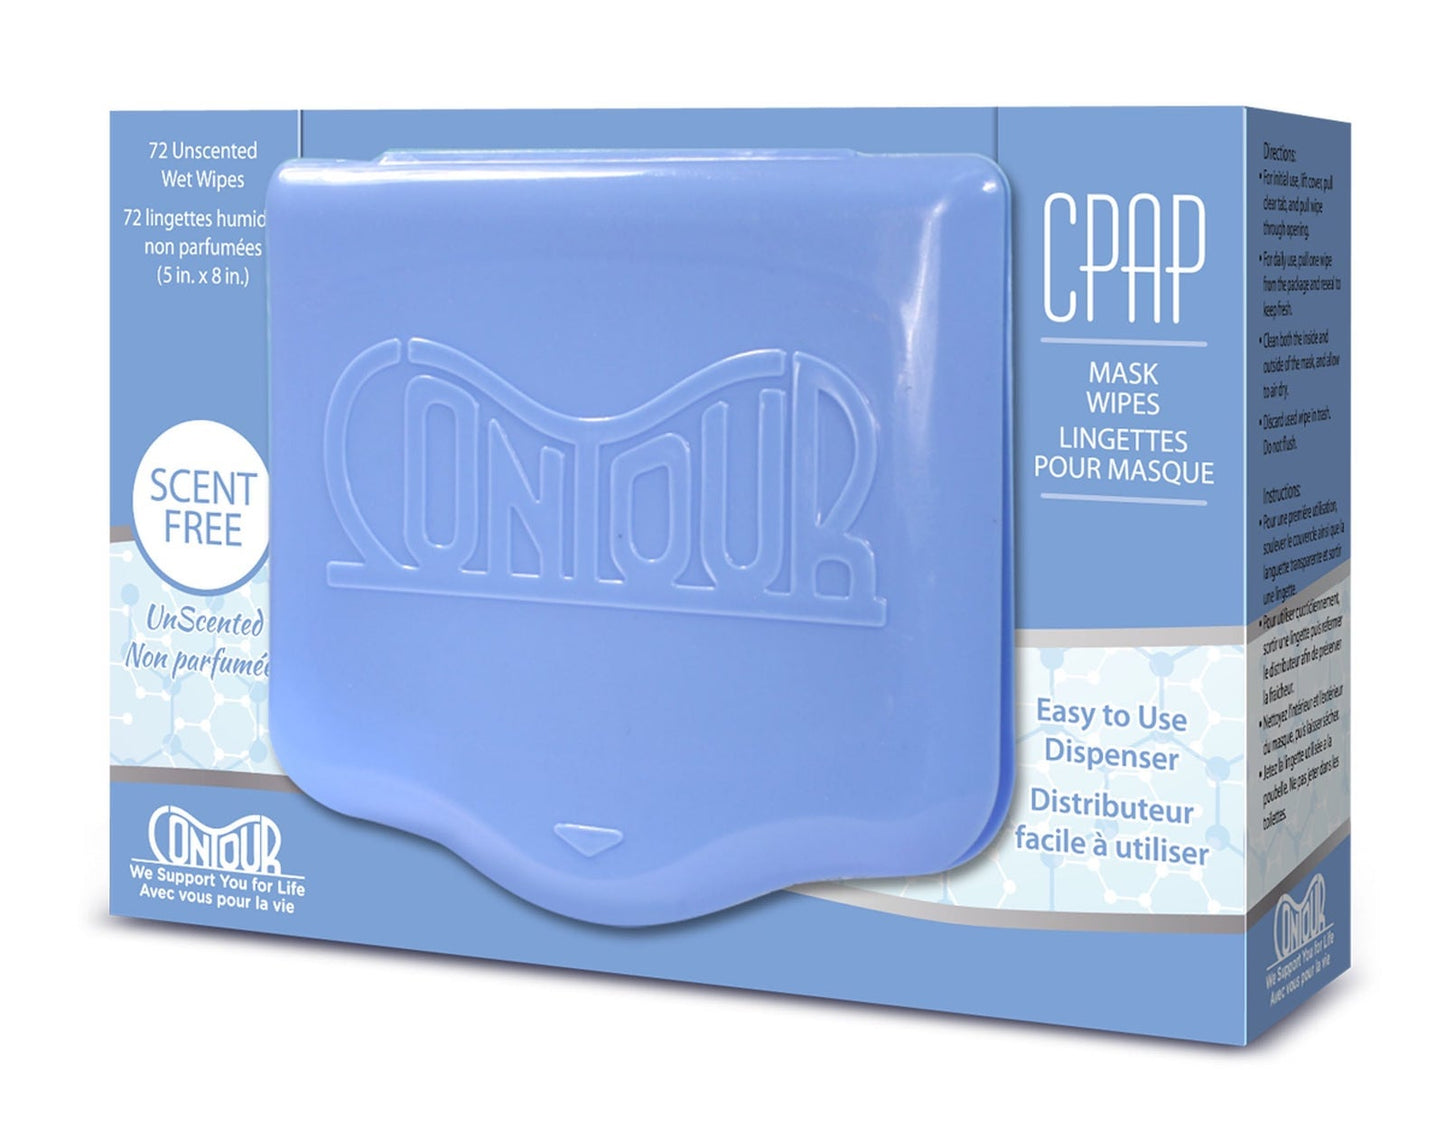 Unscented CPAP wipes